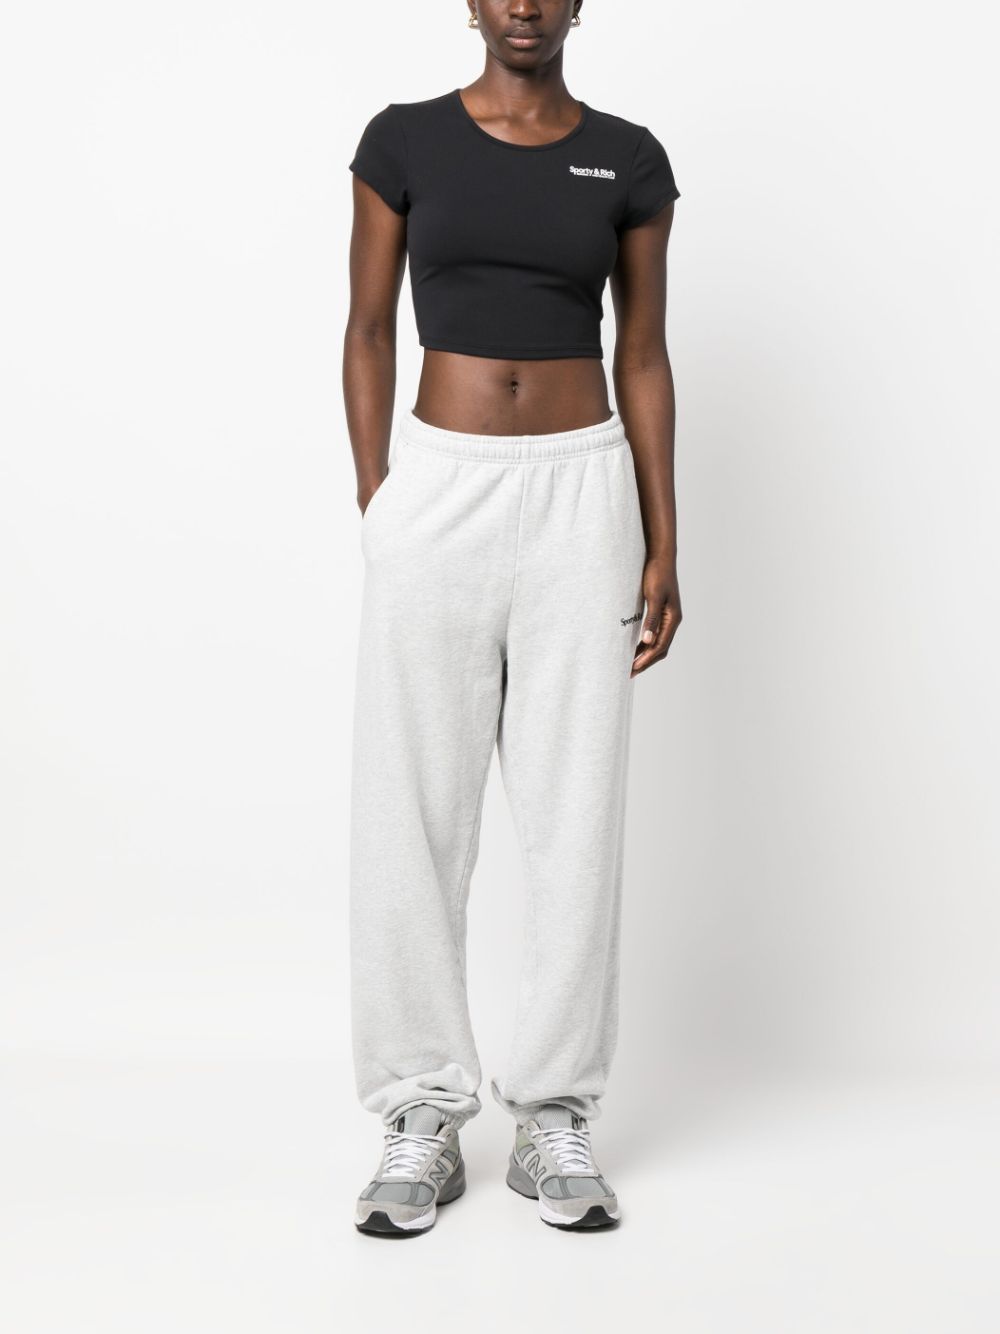 T-shirt crop con stampa in nero - donna SPORTY & RICH | TS837BK